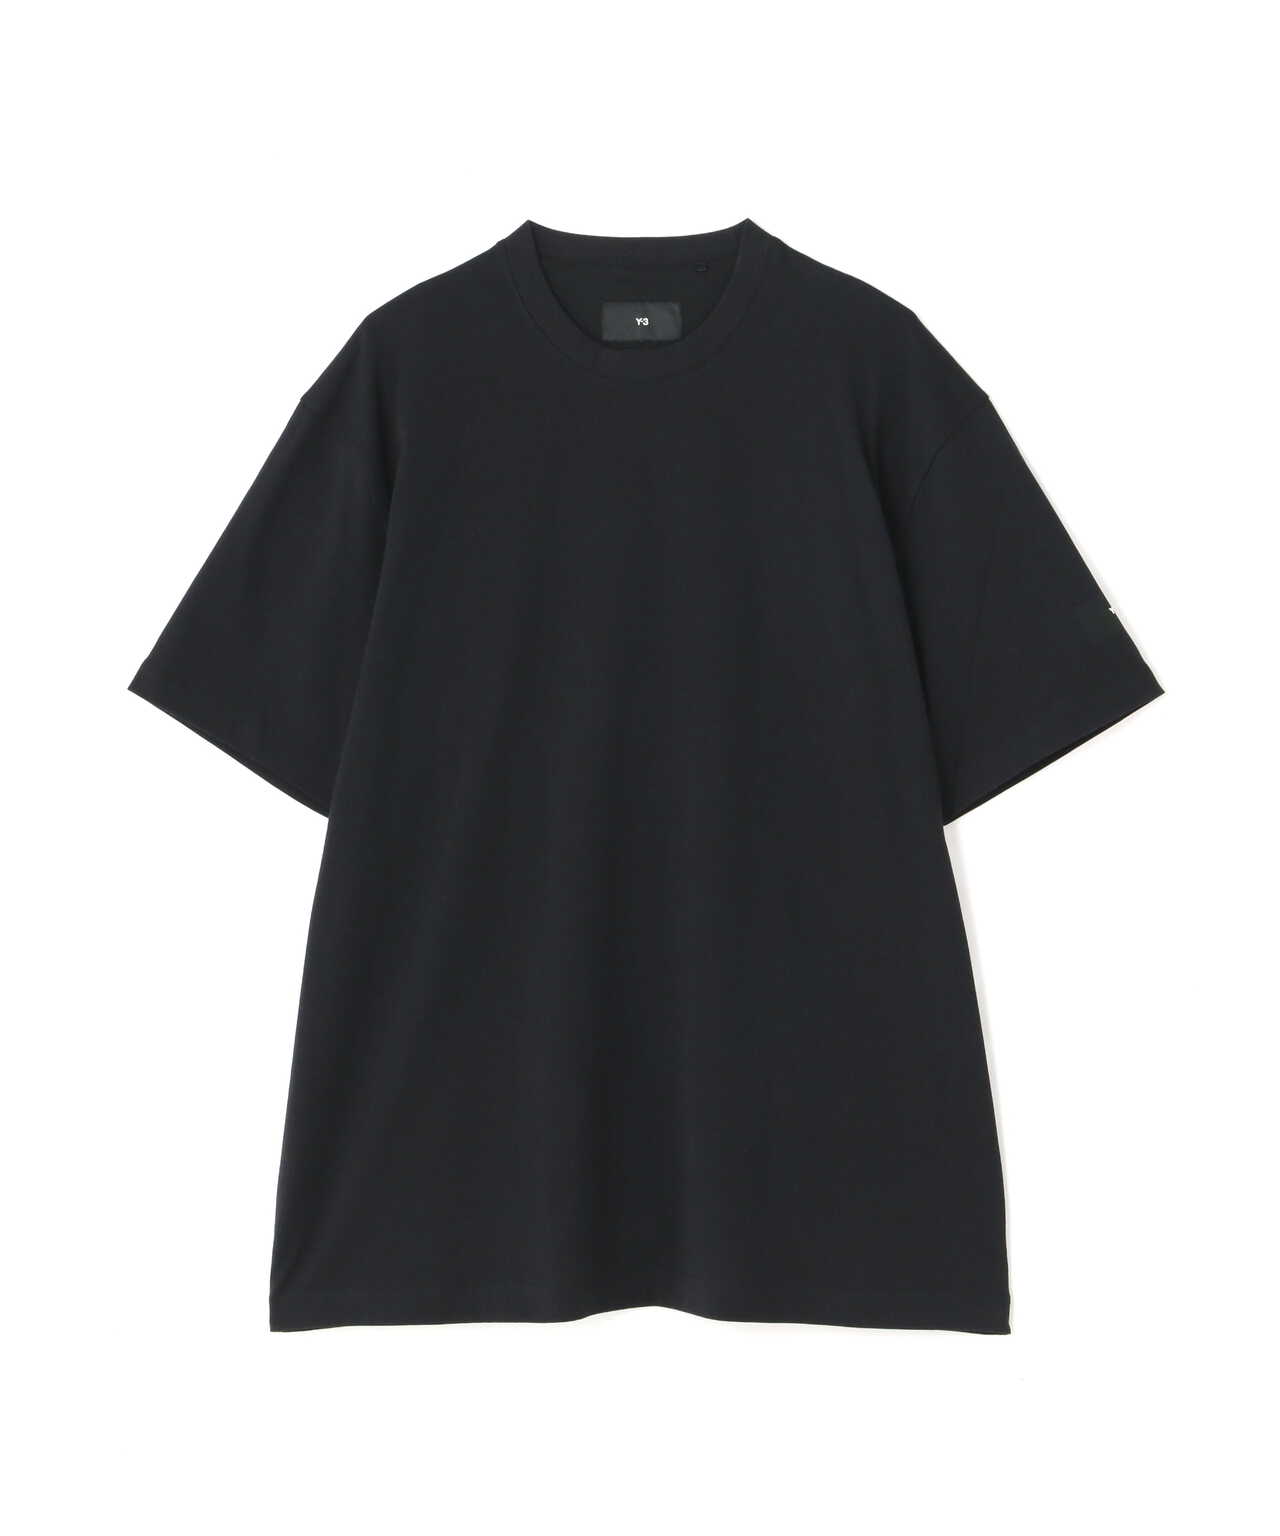 Y-3/RELAXED SS TEE/ロゴTシャツ | LHP ( エルエイチピー ) | US ...